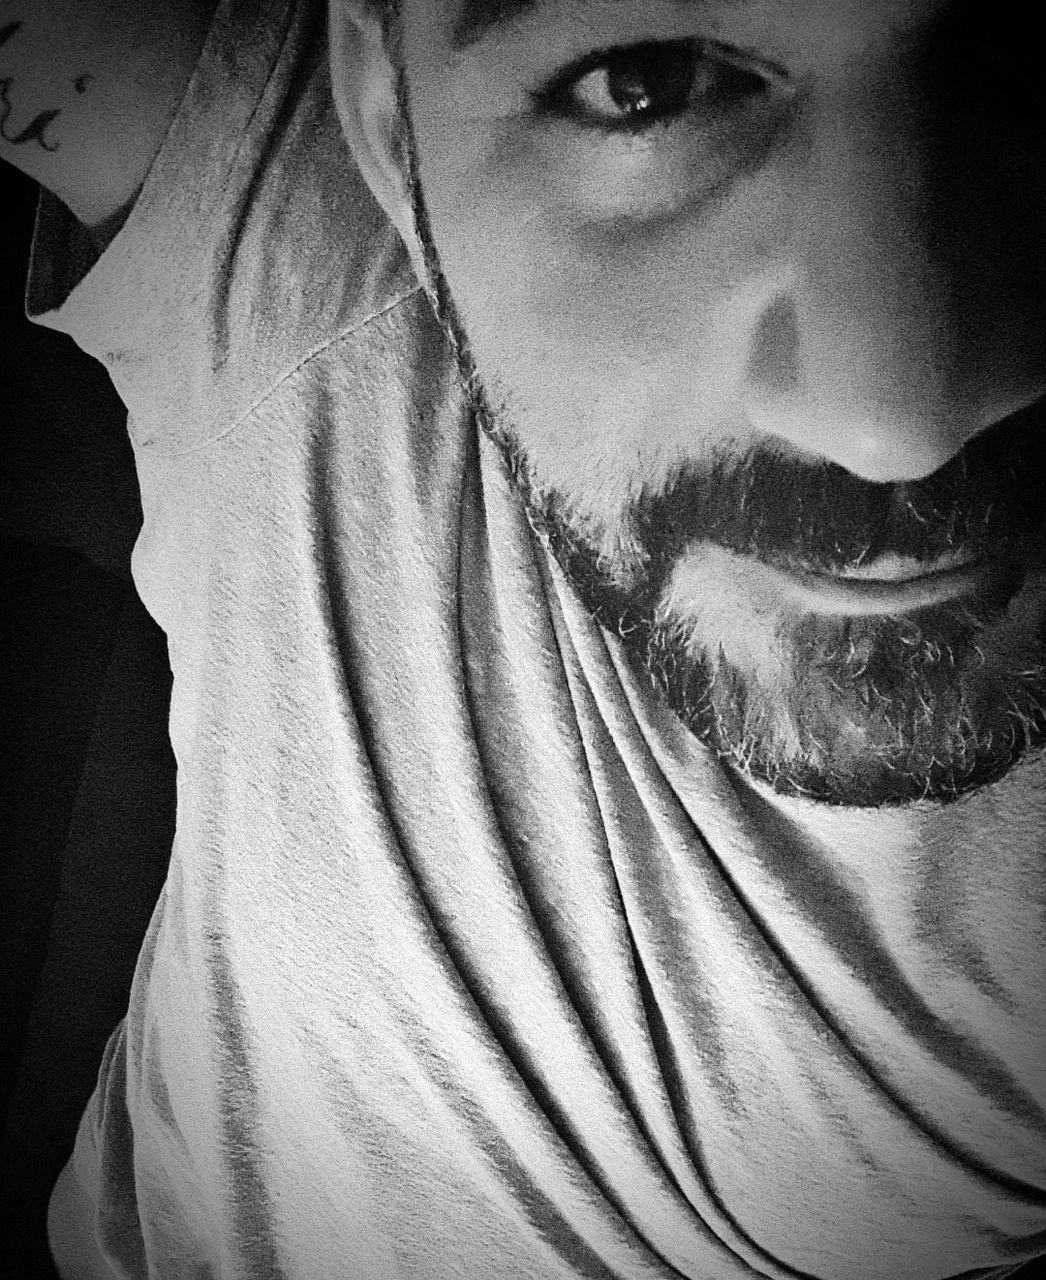 one person, portrait, black and white, white, adult, looking at camera, front view, monochrome photography, black, monochrome, close-up, human face, indoors, young adult, beard, lifestyles, facial hair, headshot, human eye, person, men, women, human head, darkness, leisure activity